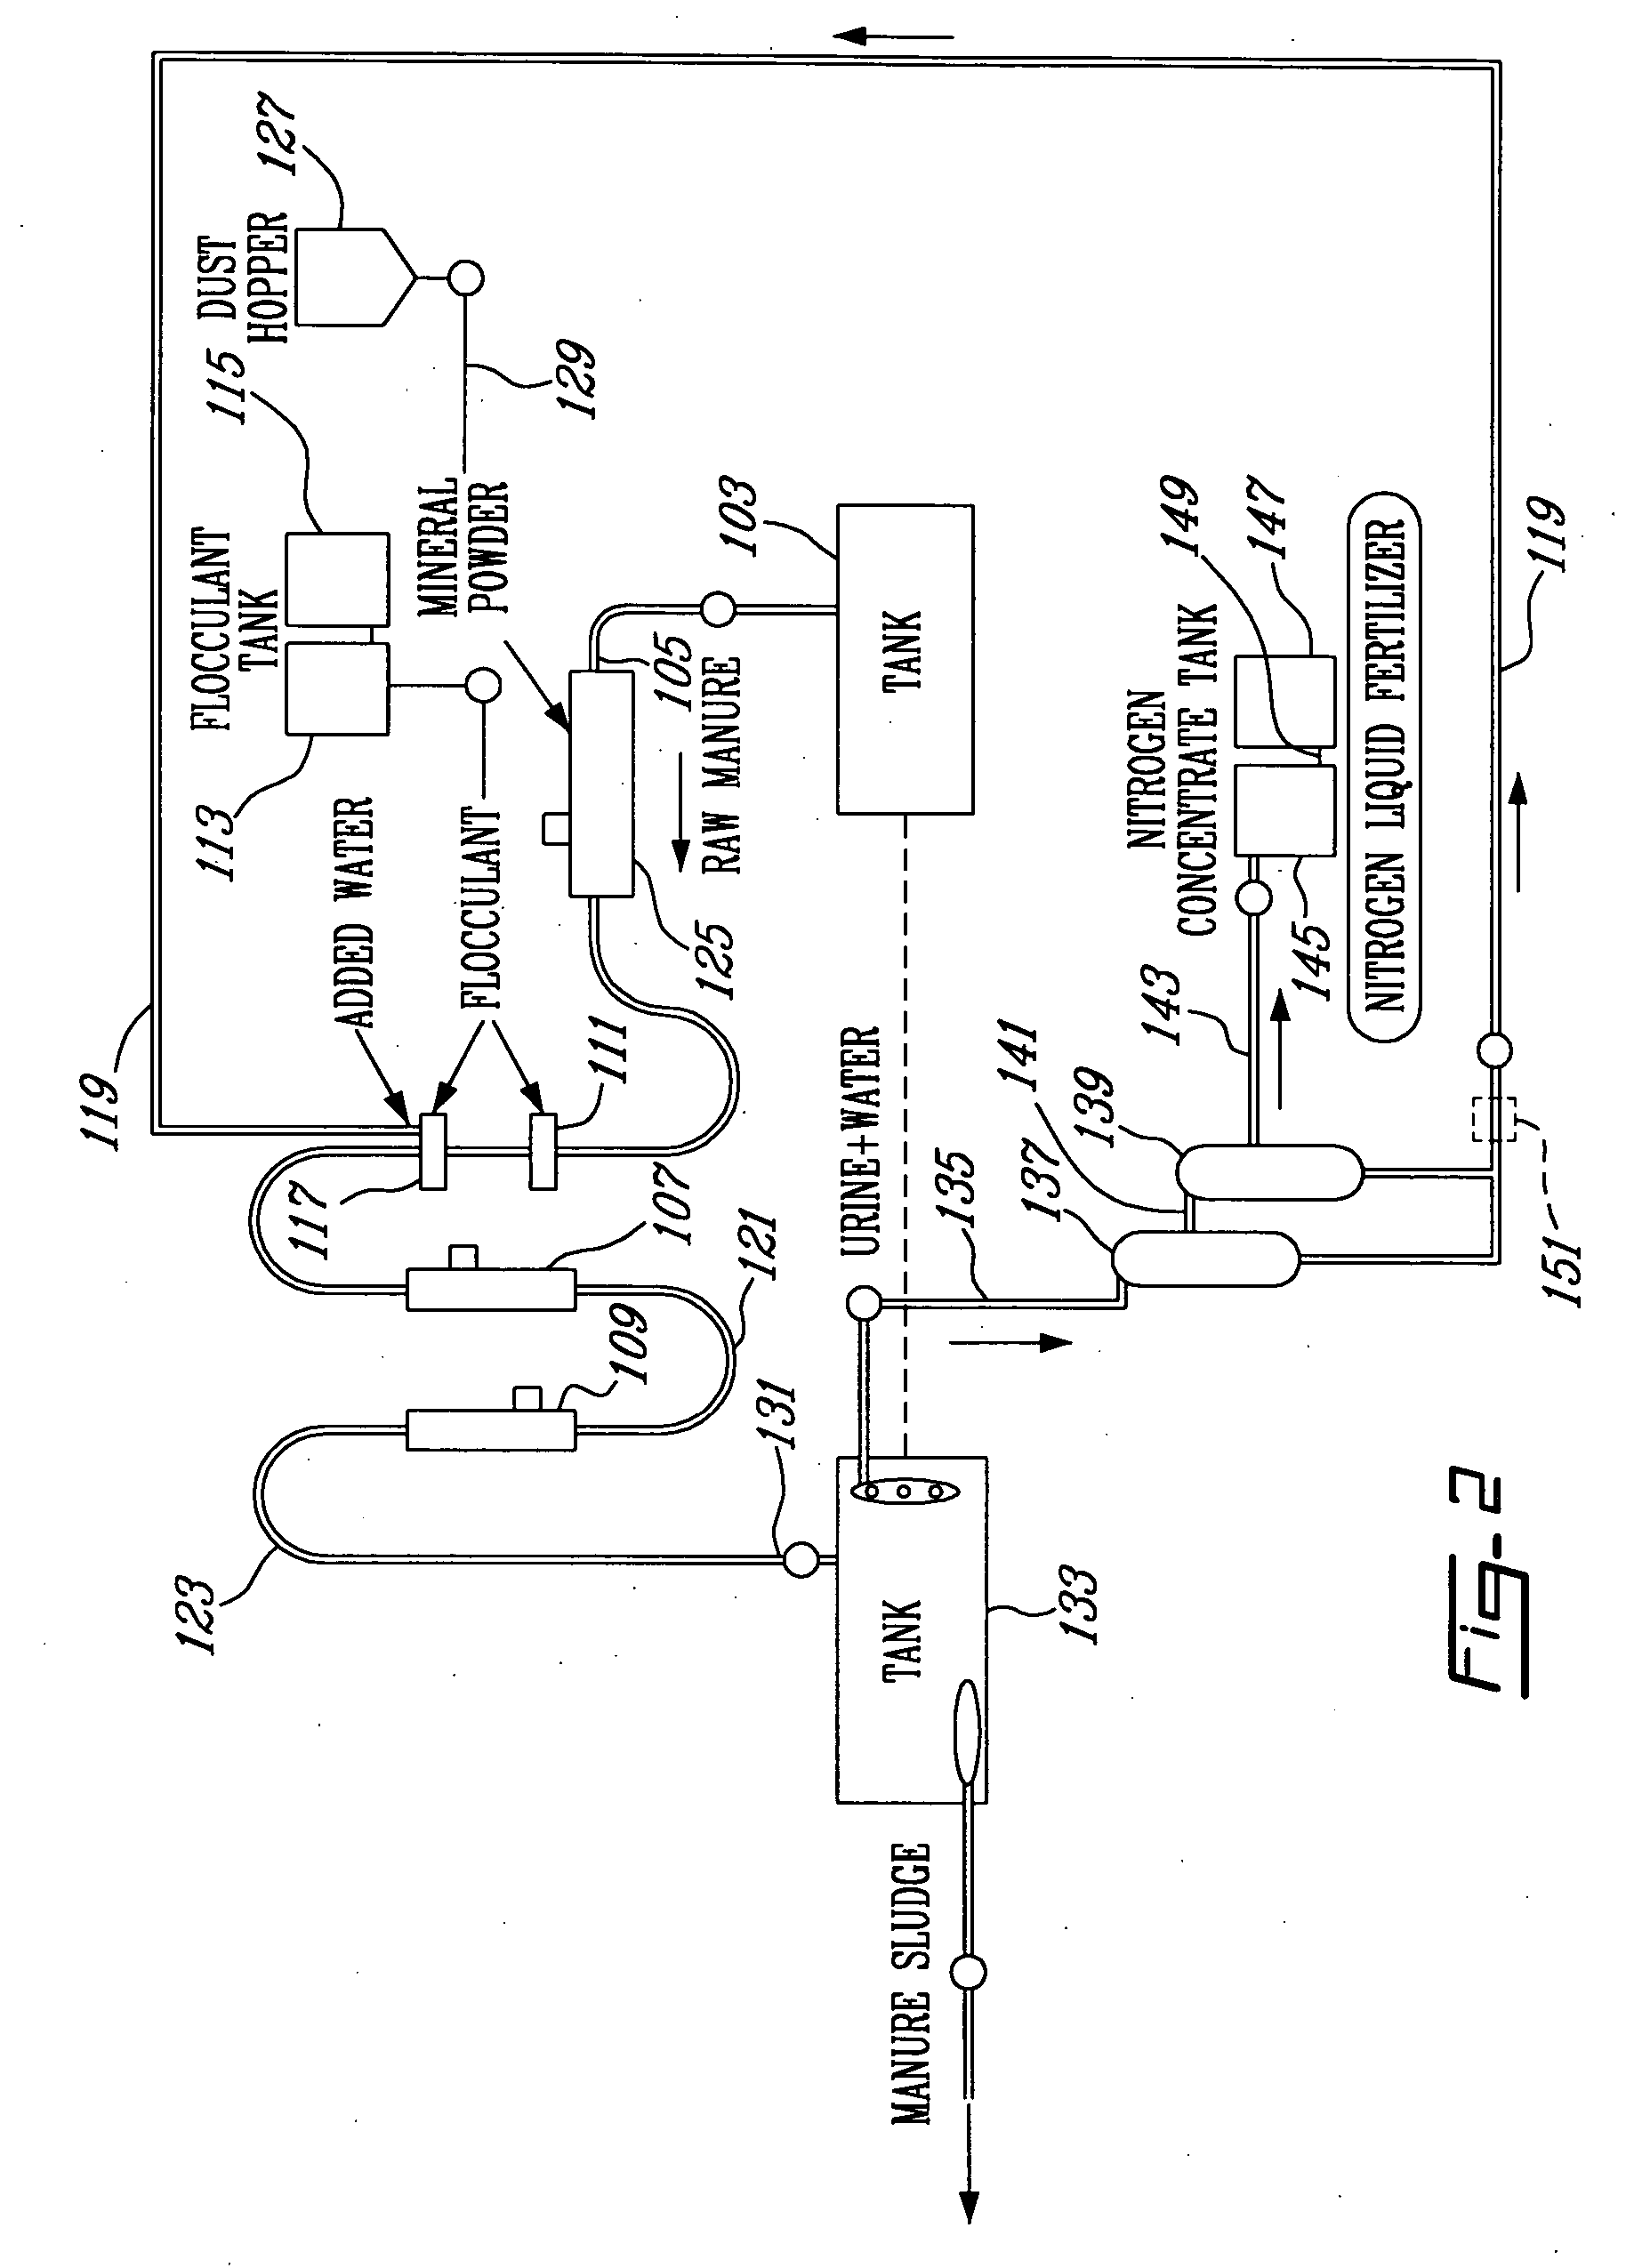 Process and device for treating raw manure